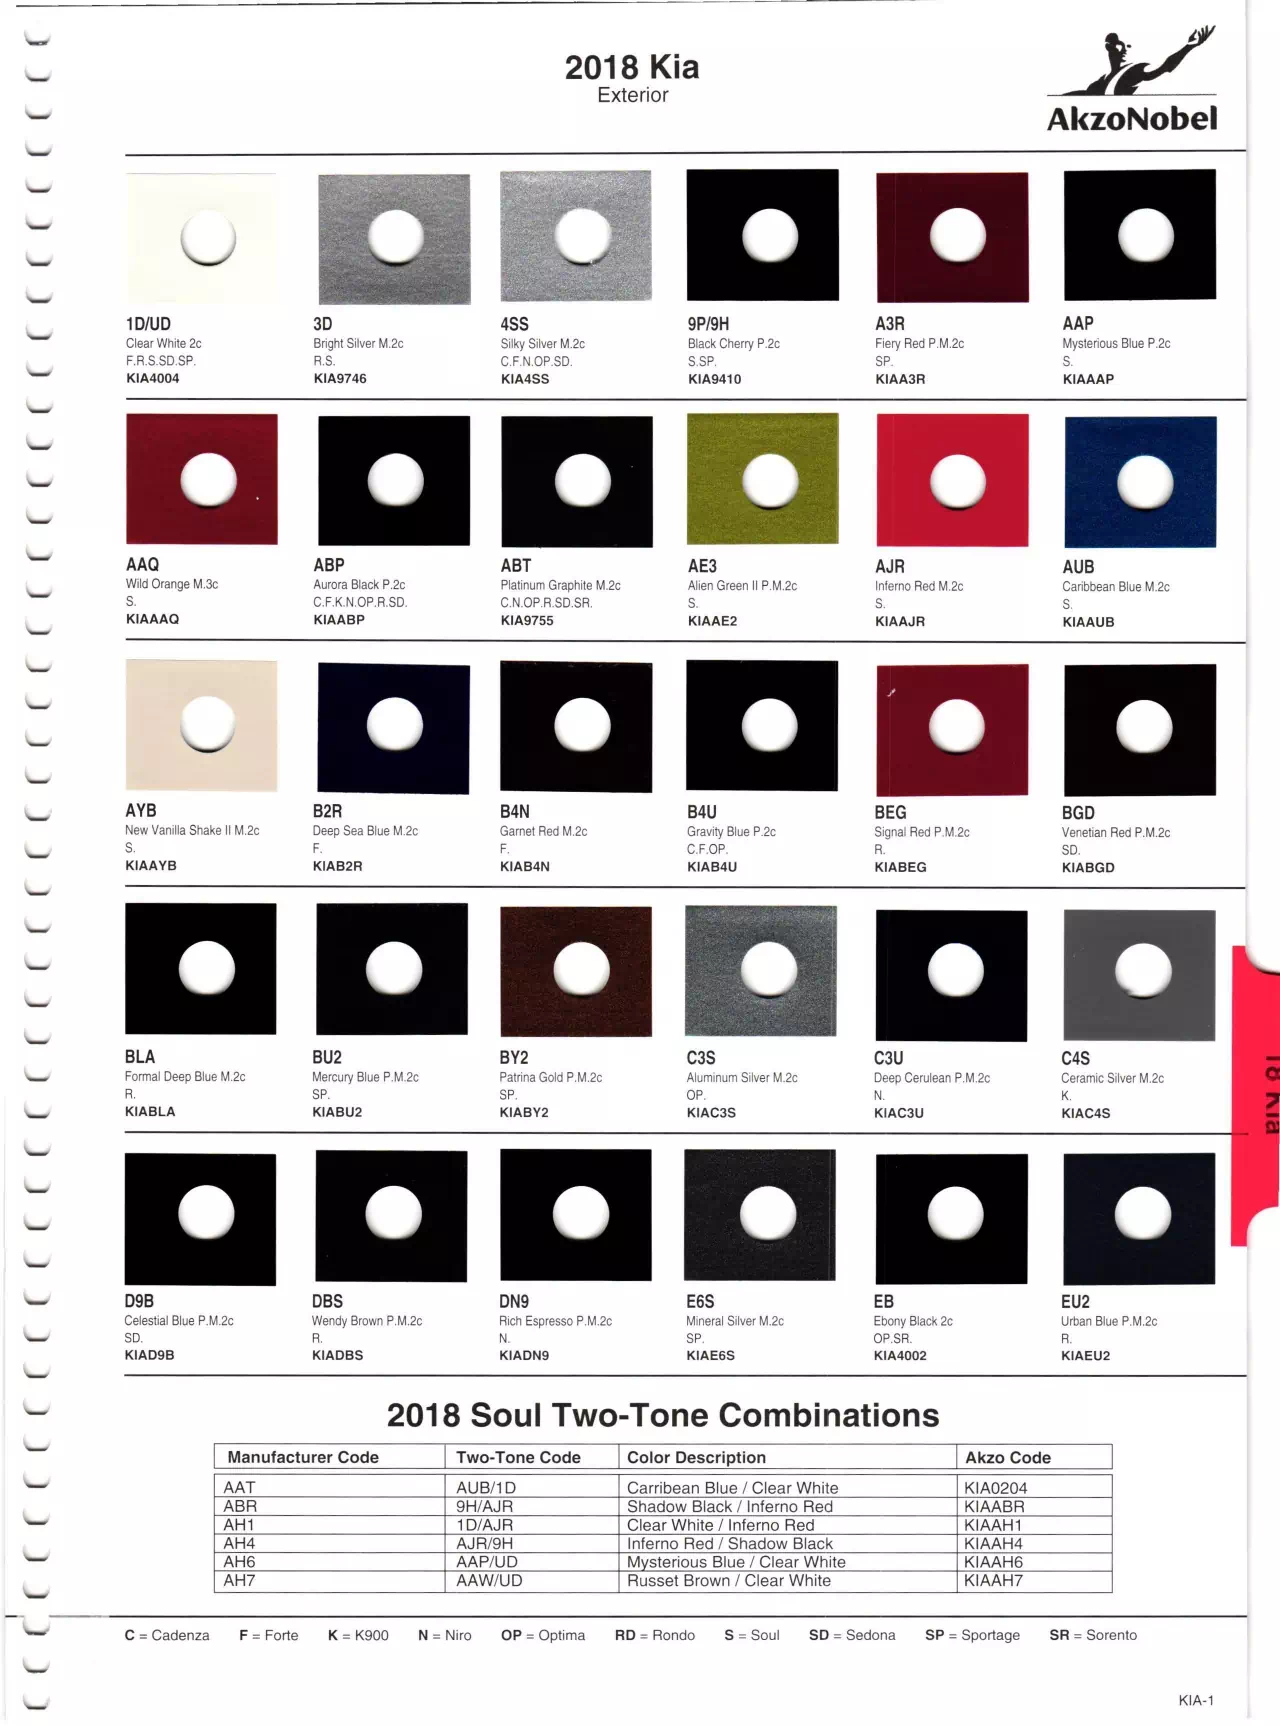 Paint Swatches, Color names, and codes for Kia in 2018